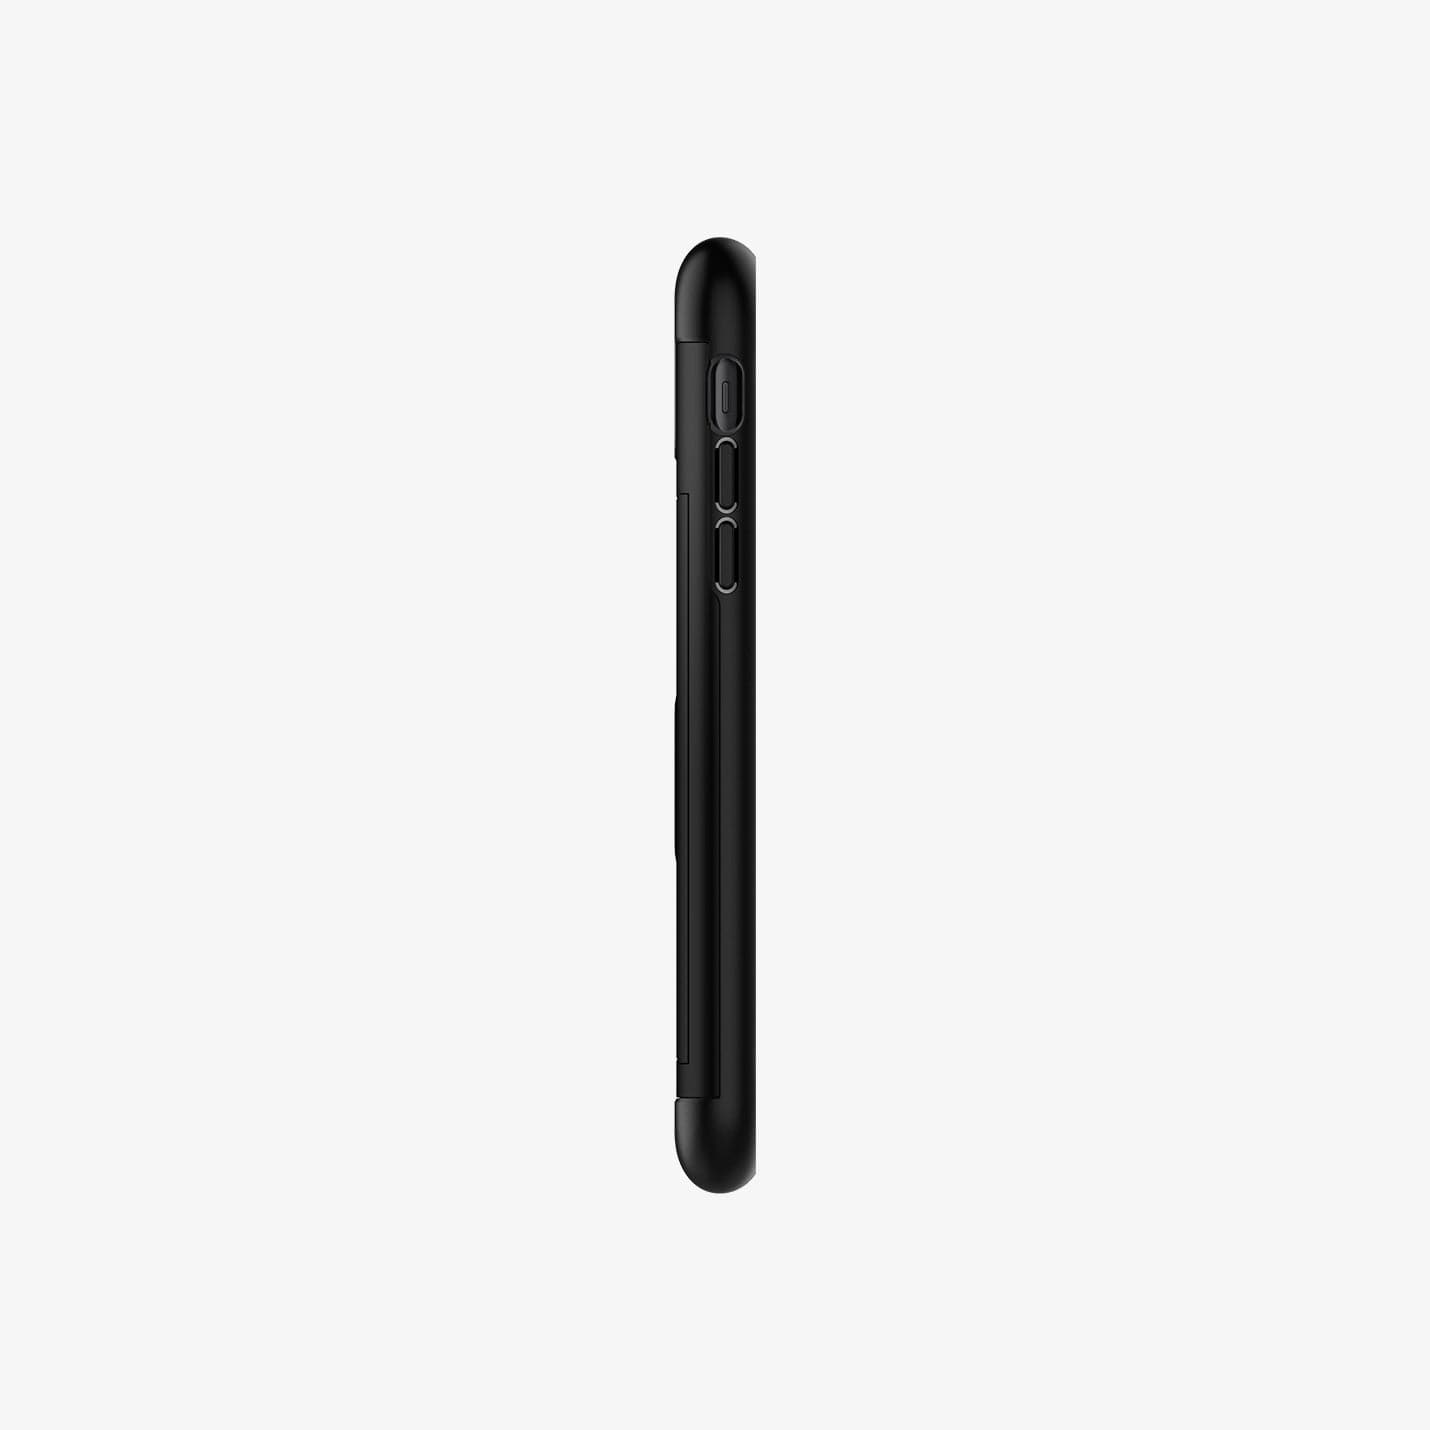 064CS24882 - iPhone XR Case Slim Armor CS in black showing the side with volume controls